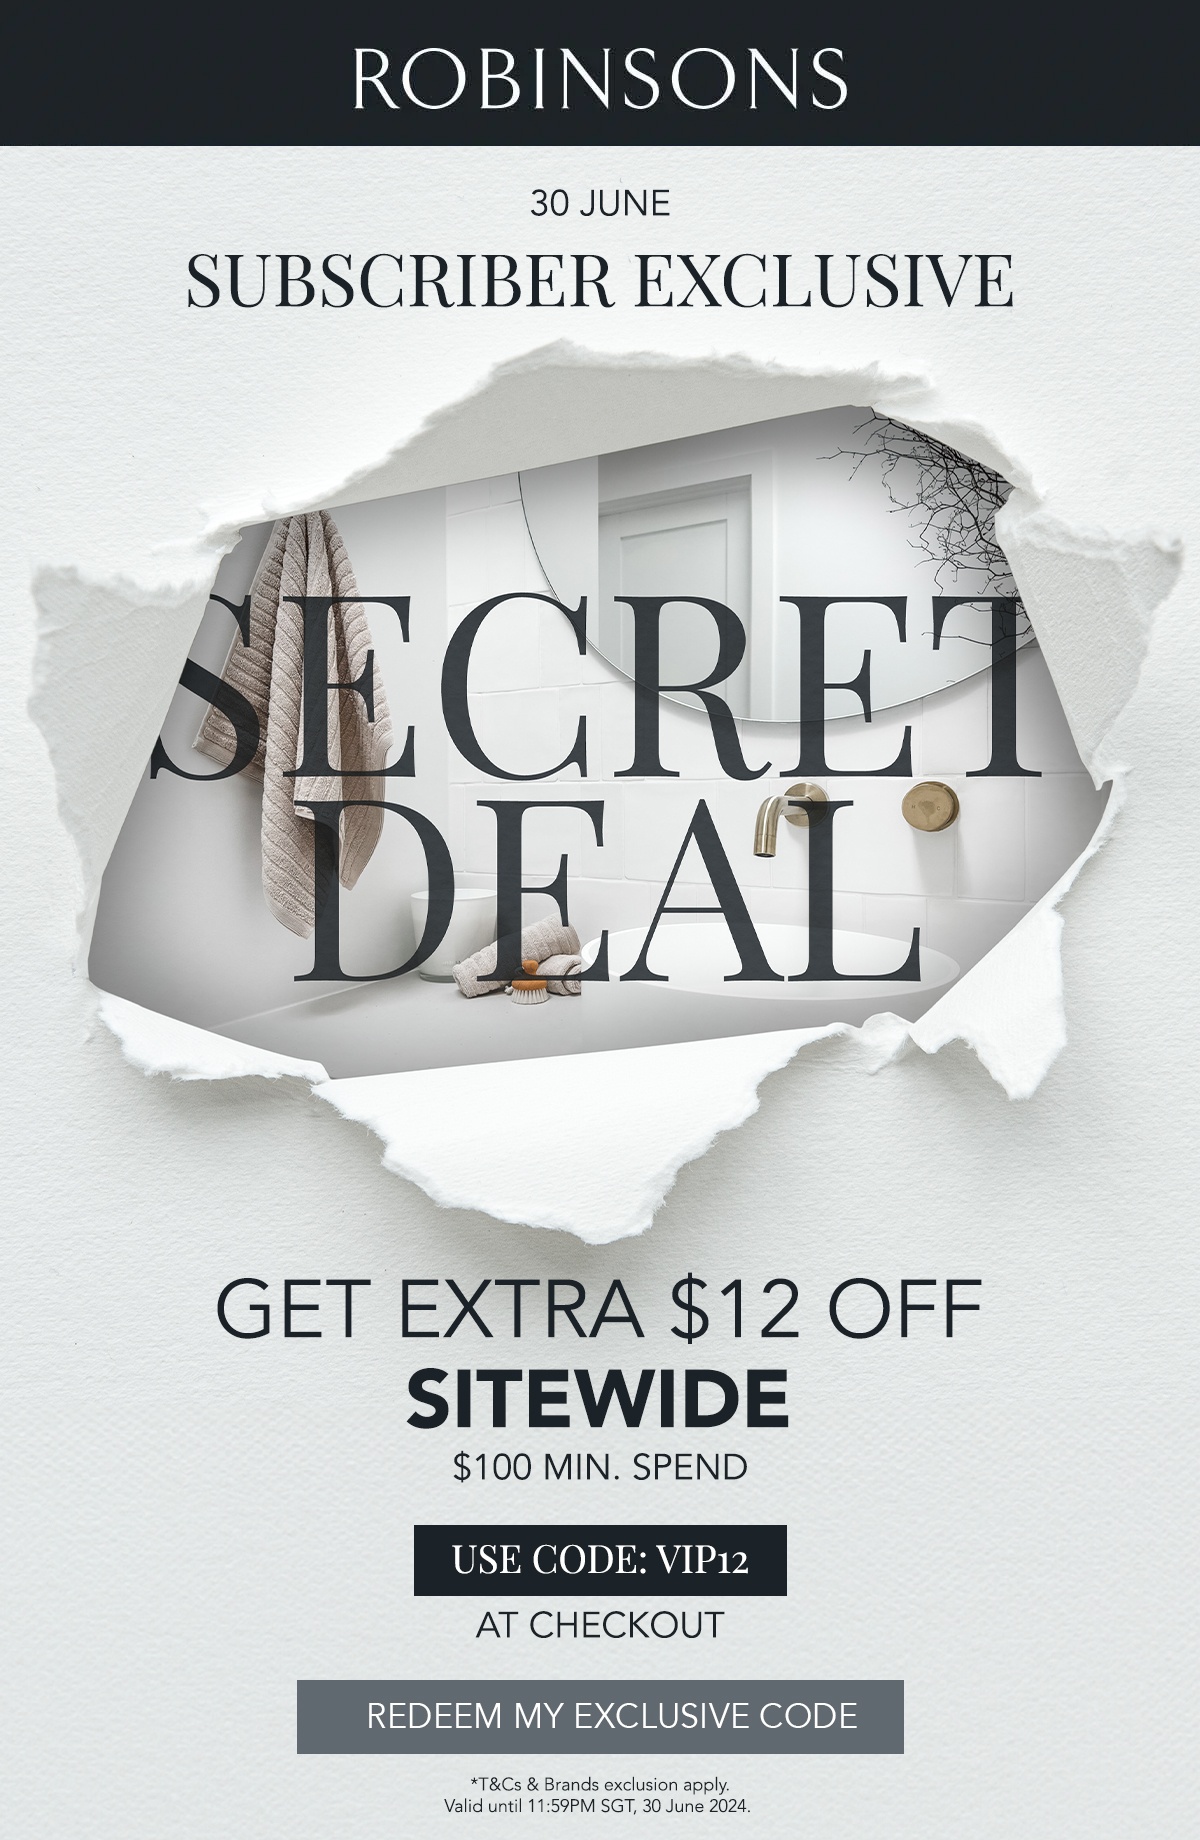 Use VIP12 to reveal the Secret Deal